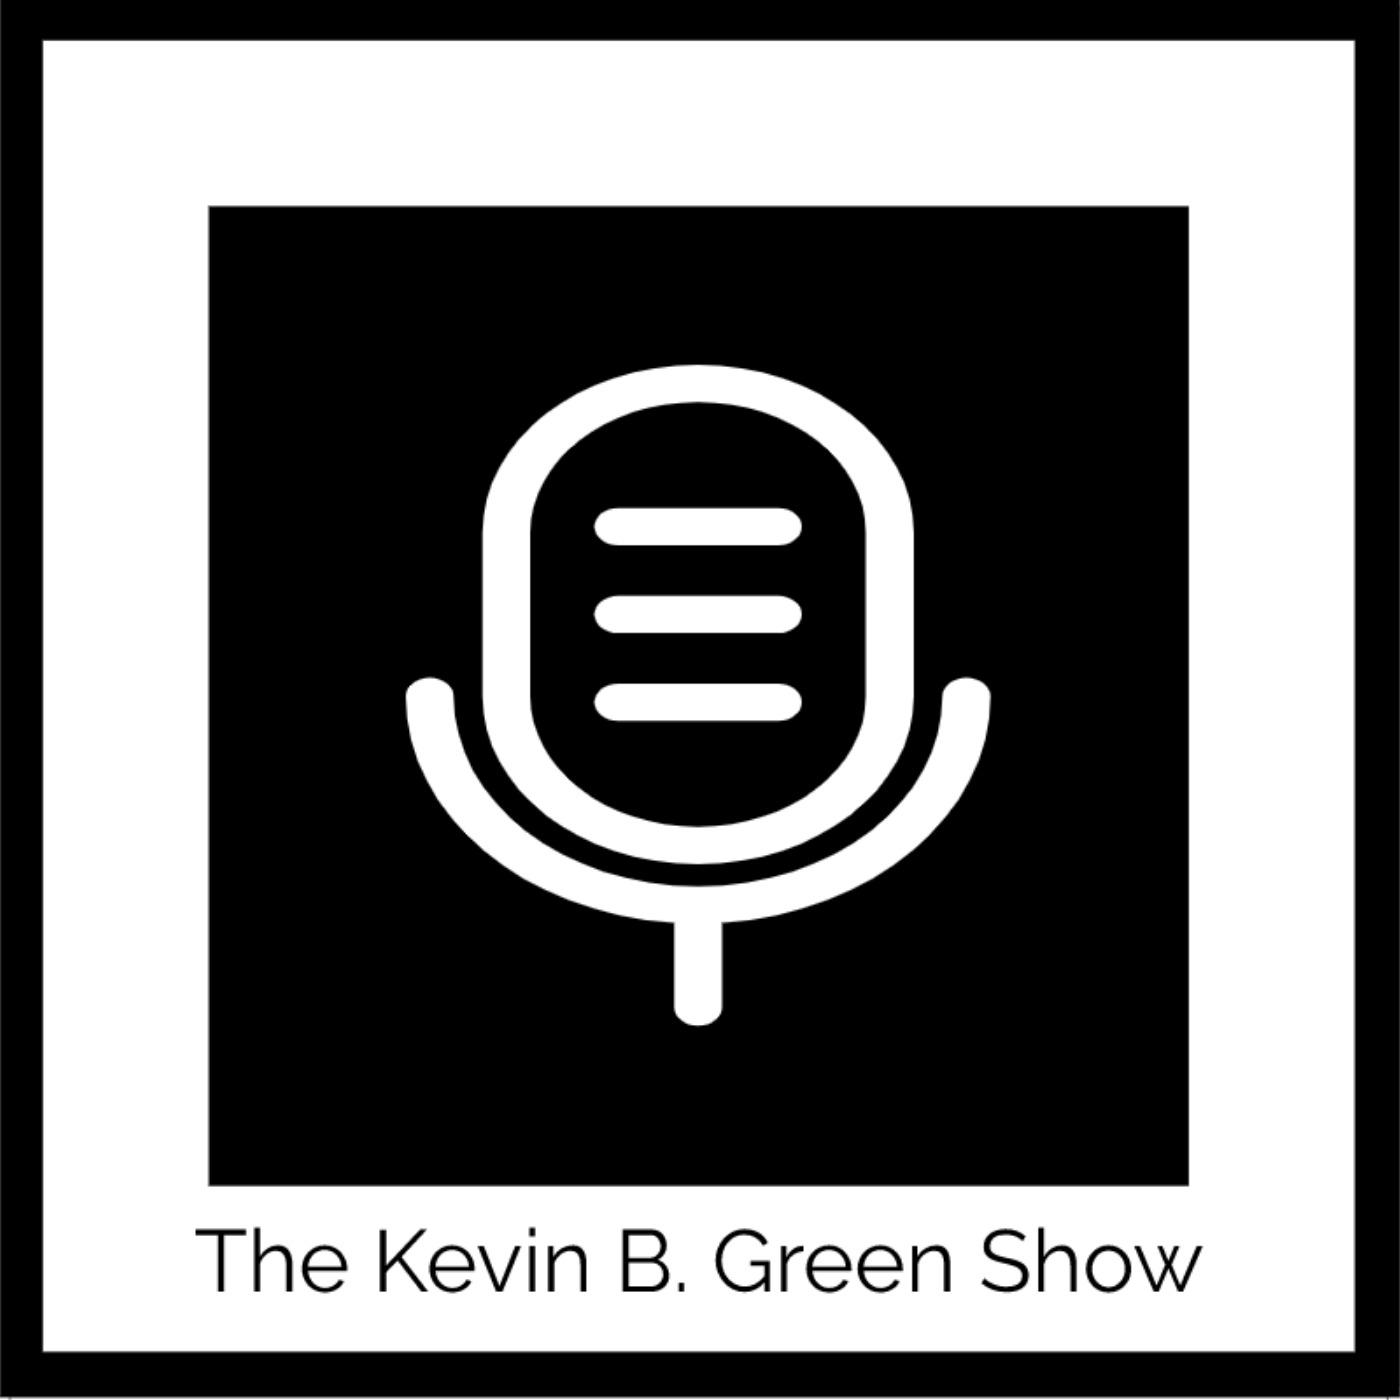 The Kevin B. Green Show